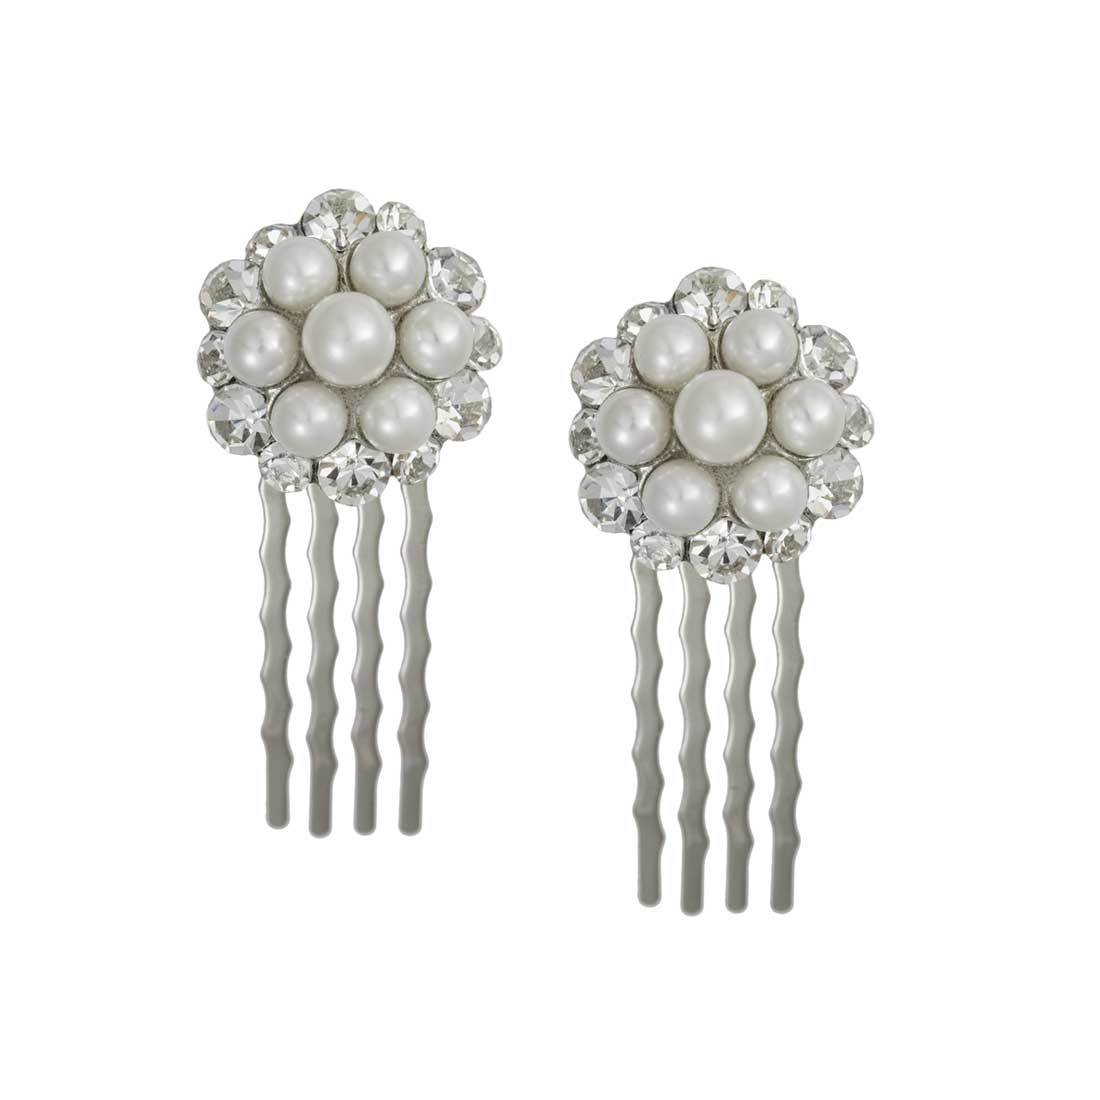 Pearls of Love Small Wedding Hair Combs - Pair